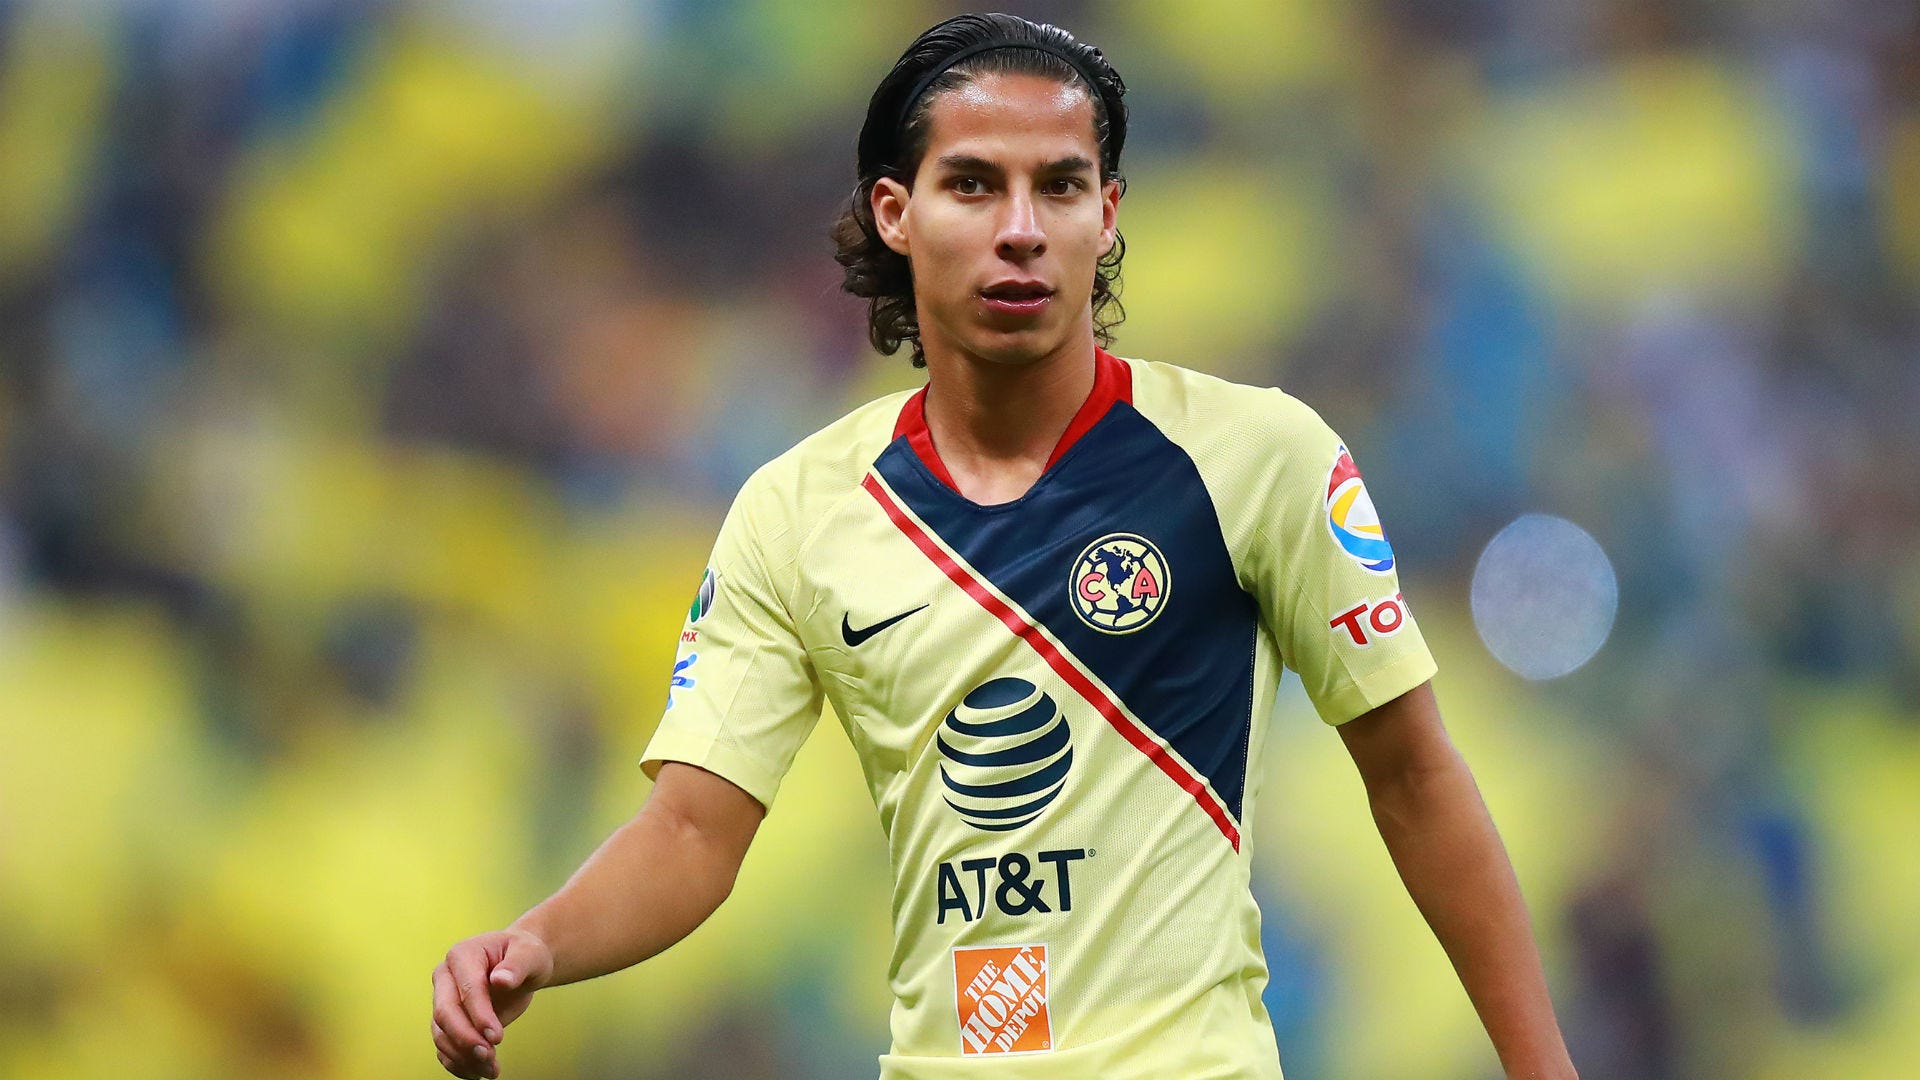 El Tri news: Mexican youngster Diego Lainez a perfect fit for Ajax - Juan  Carlos Osorio | Goal.com